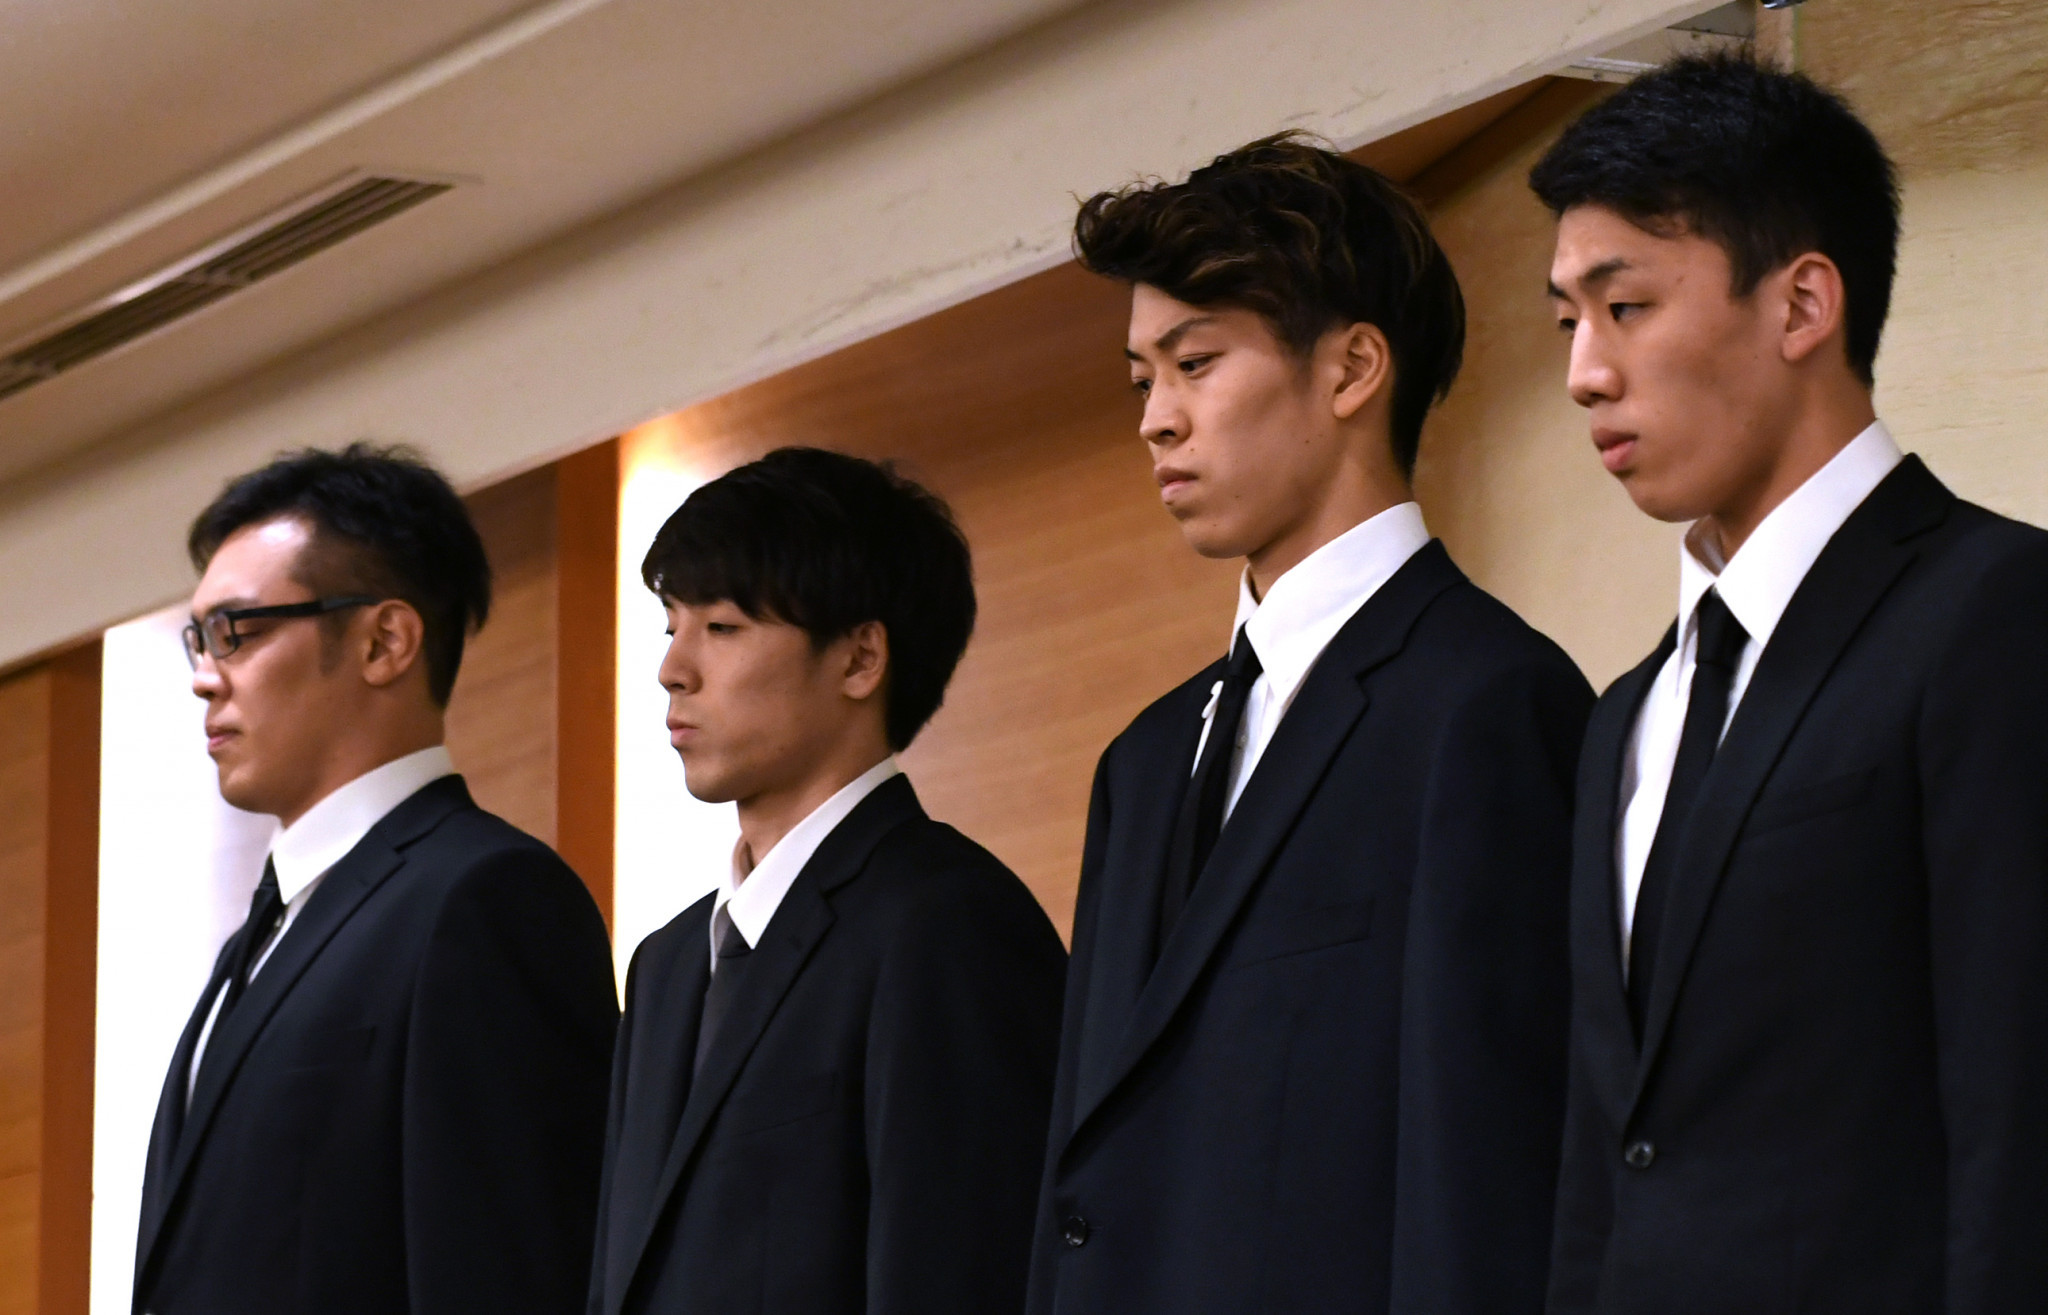 Four members of the Japanese men’s basketball team that were kicked out of the squad and sent home from the Asian Games here after they allegedly paid for sex have been handed 12-month suspensions ©Getty Images